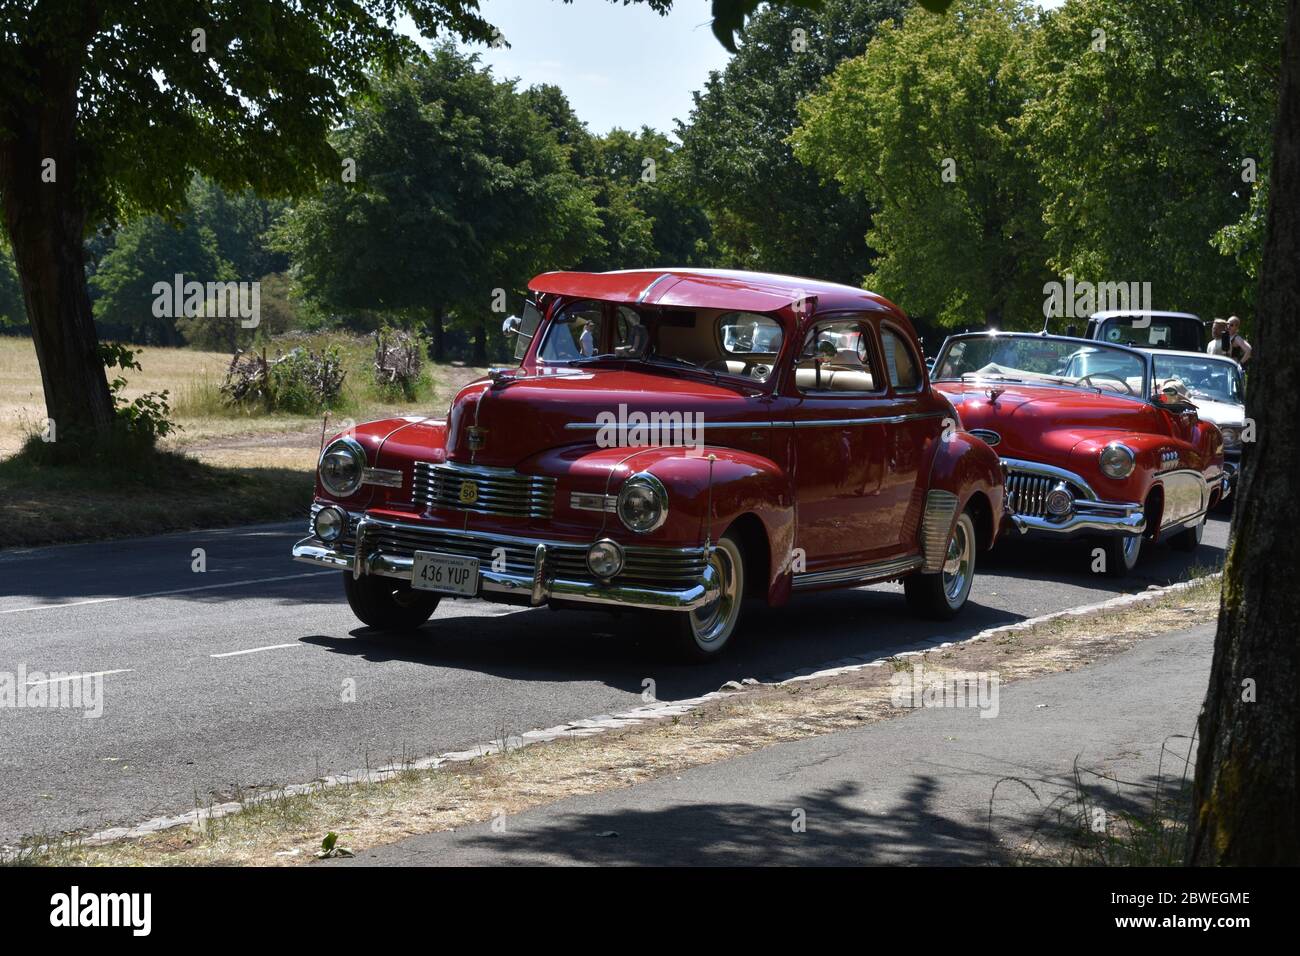 A Classic red vintage car 1946-1947 Nash Stock Photo